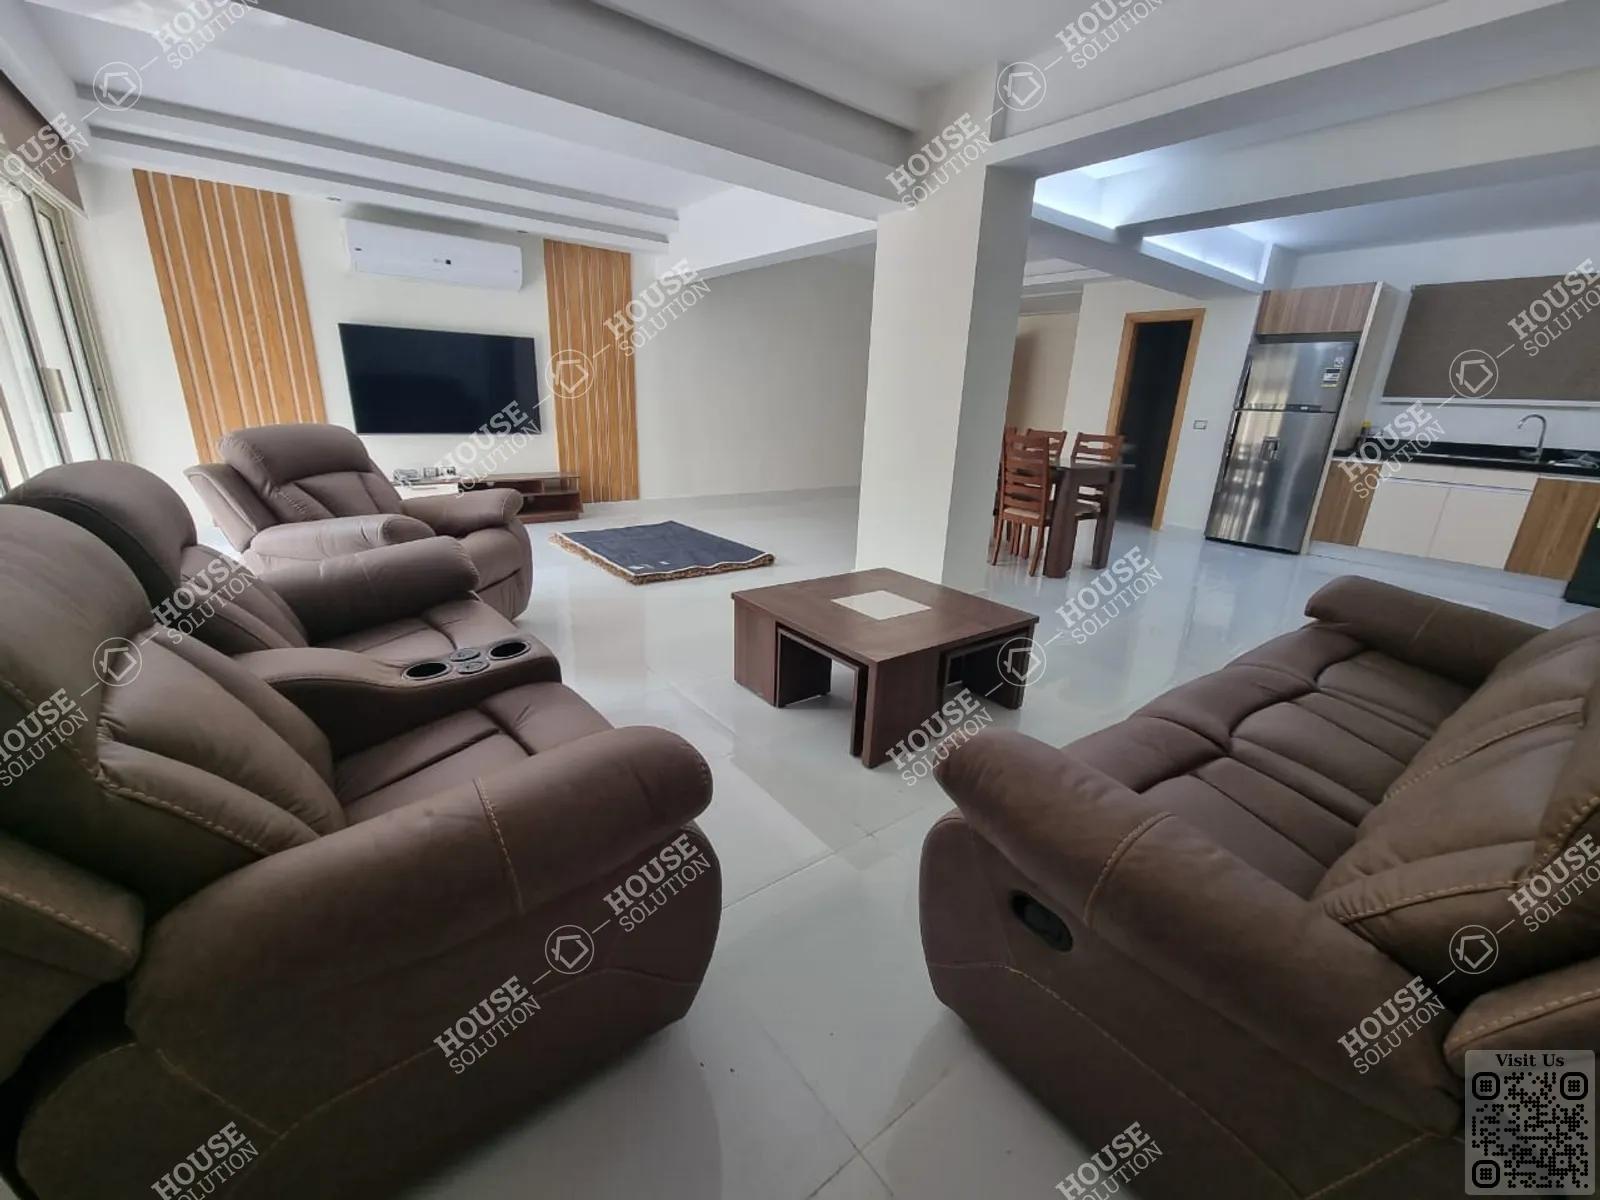 RECEPTION  @ Apartments For Rent In Maadi Maadi Sarayat Area: 145 m² consists of 2 Bedrooms 2 Bathrooms Modern furnished 5 stars #5758-0